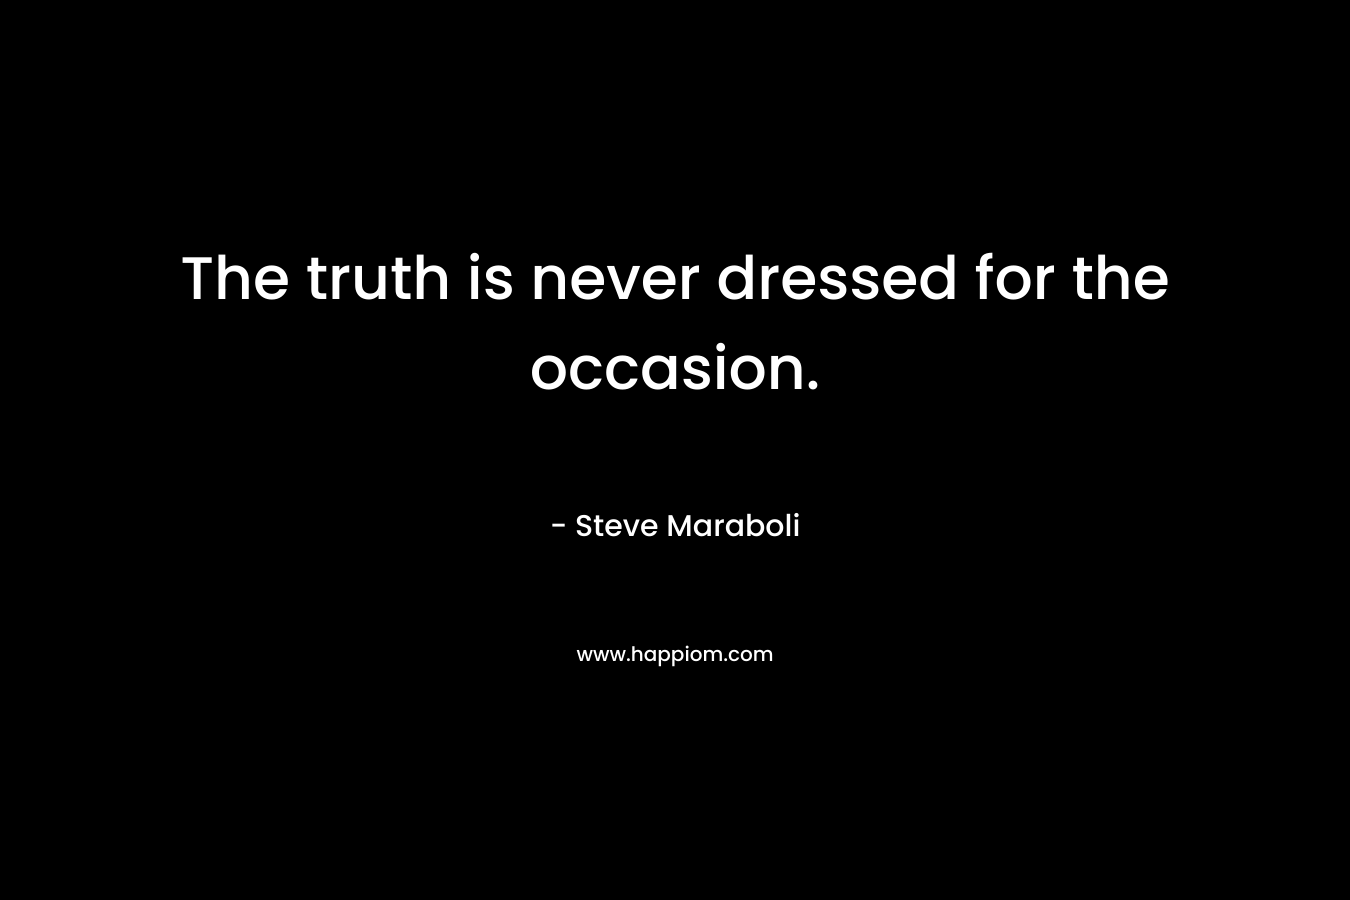 The truth is never dressed for the occasion.